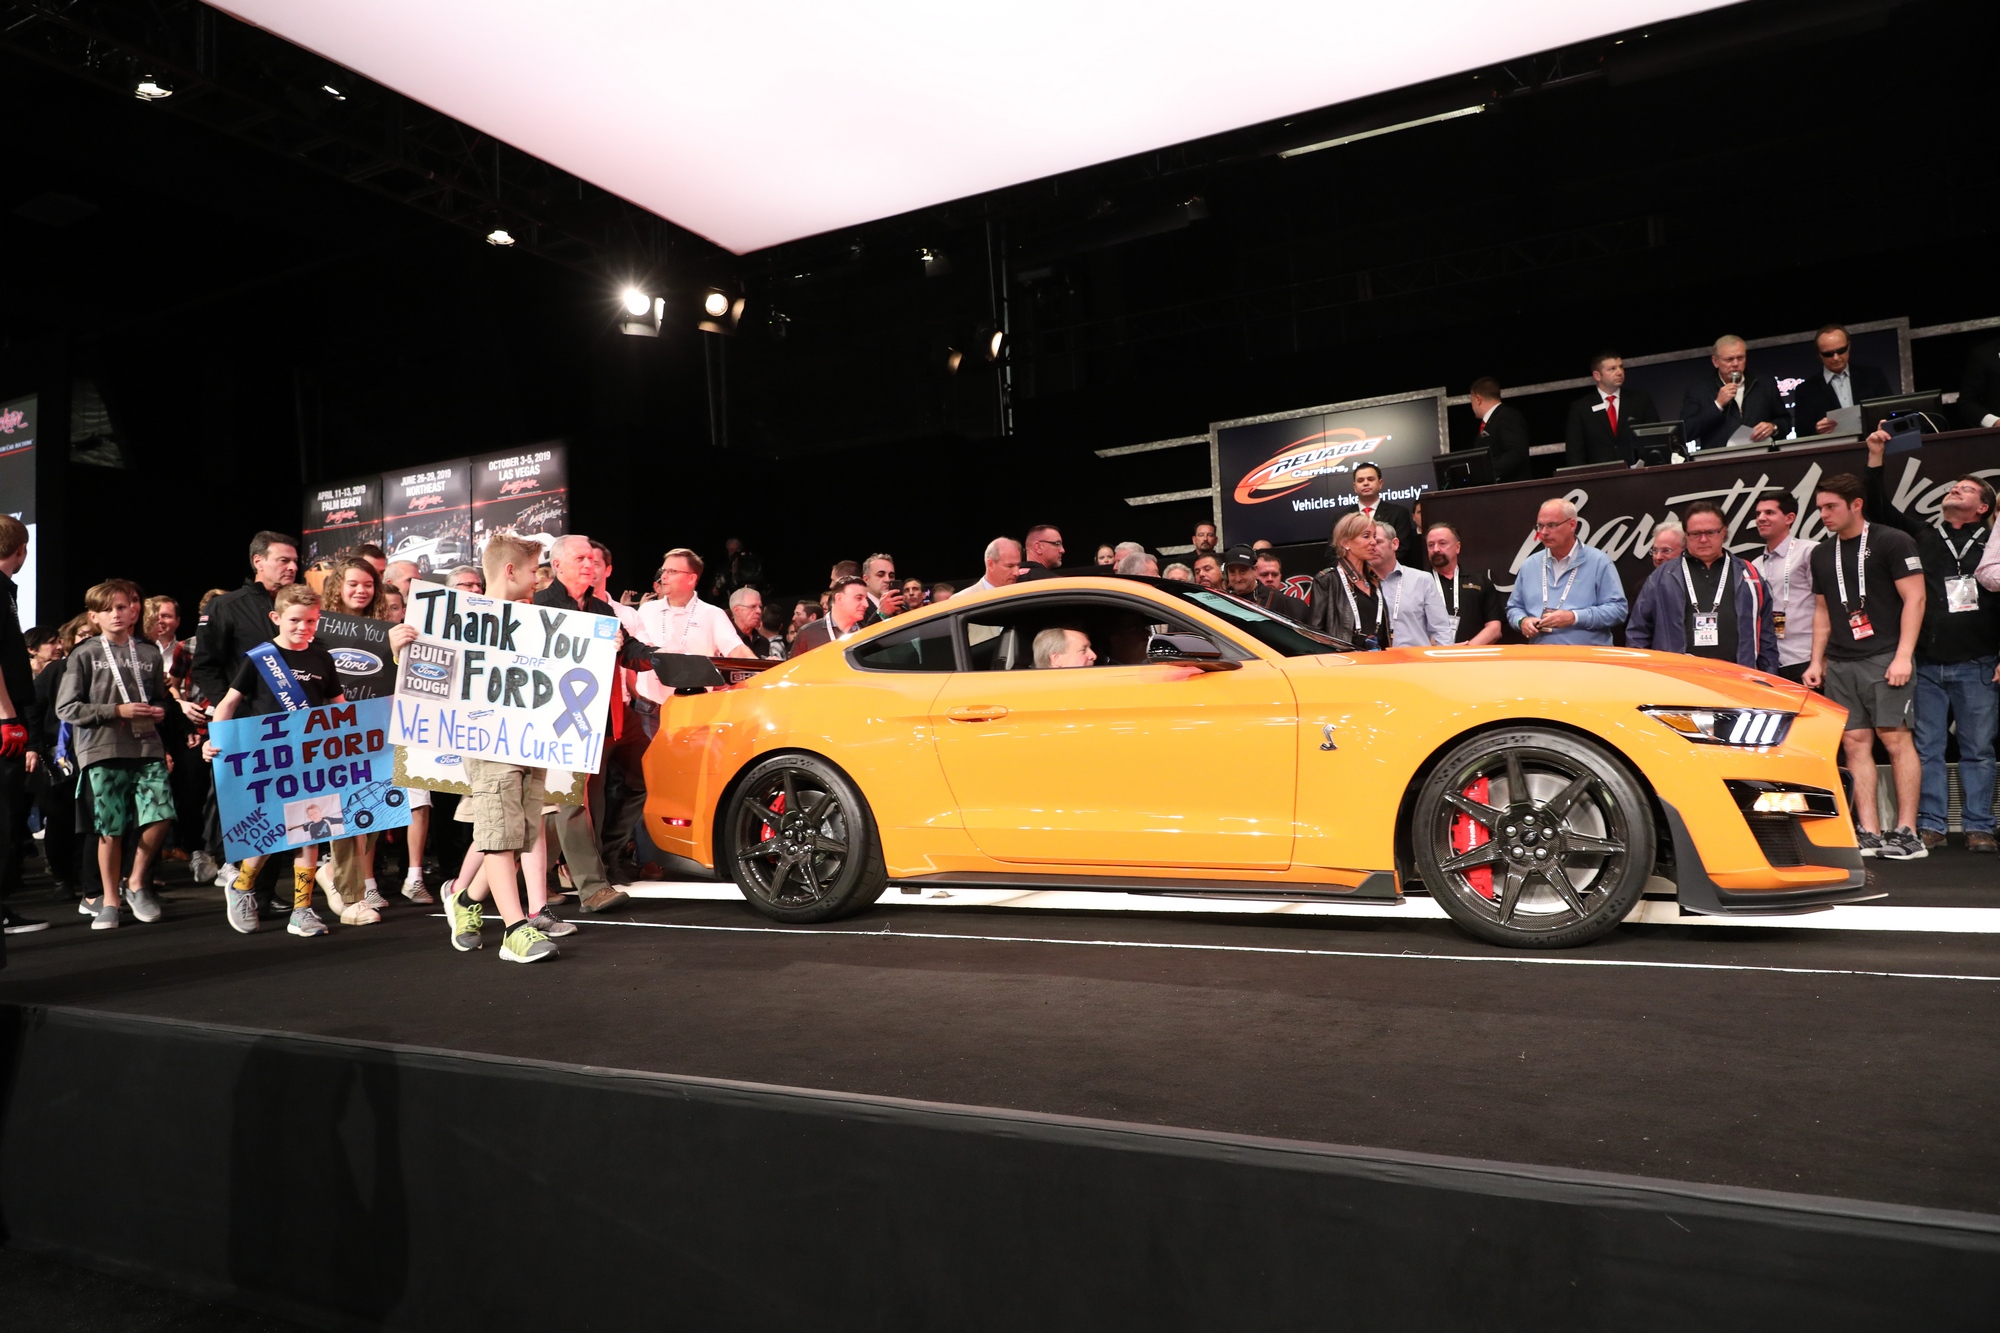 2020 Shelby Mustang Auction